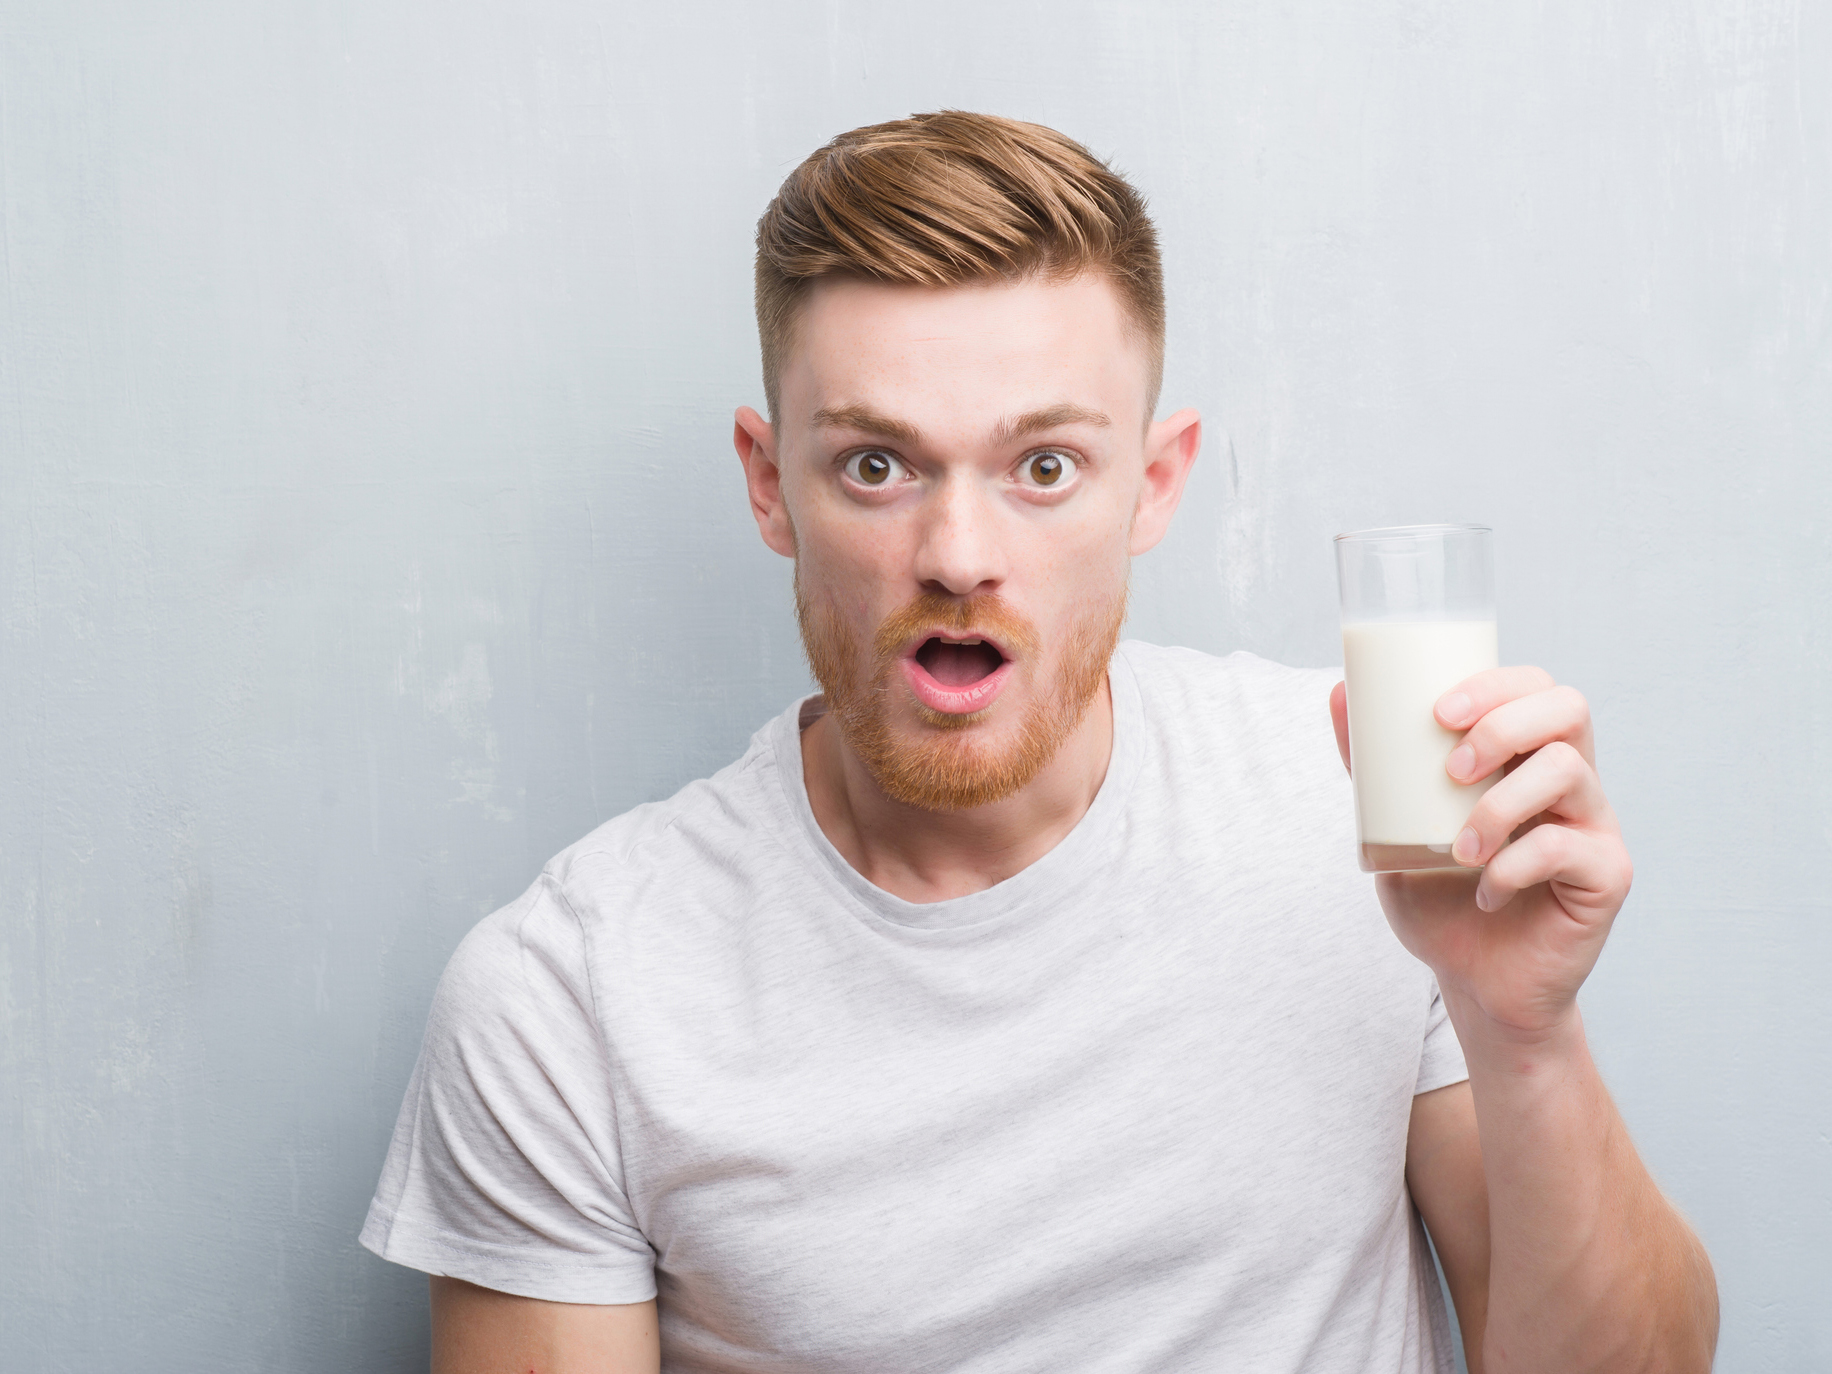 One vital reason men may want to cut down on dairy